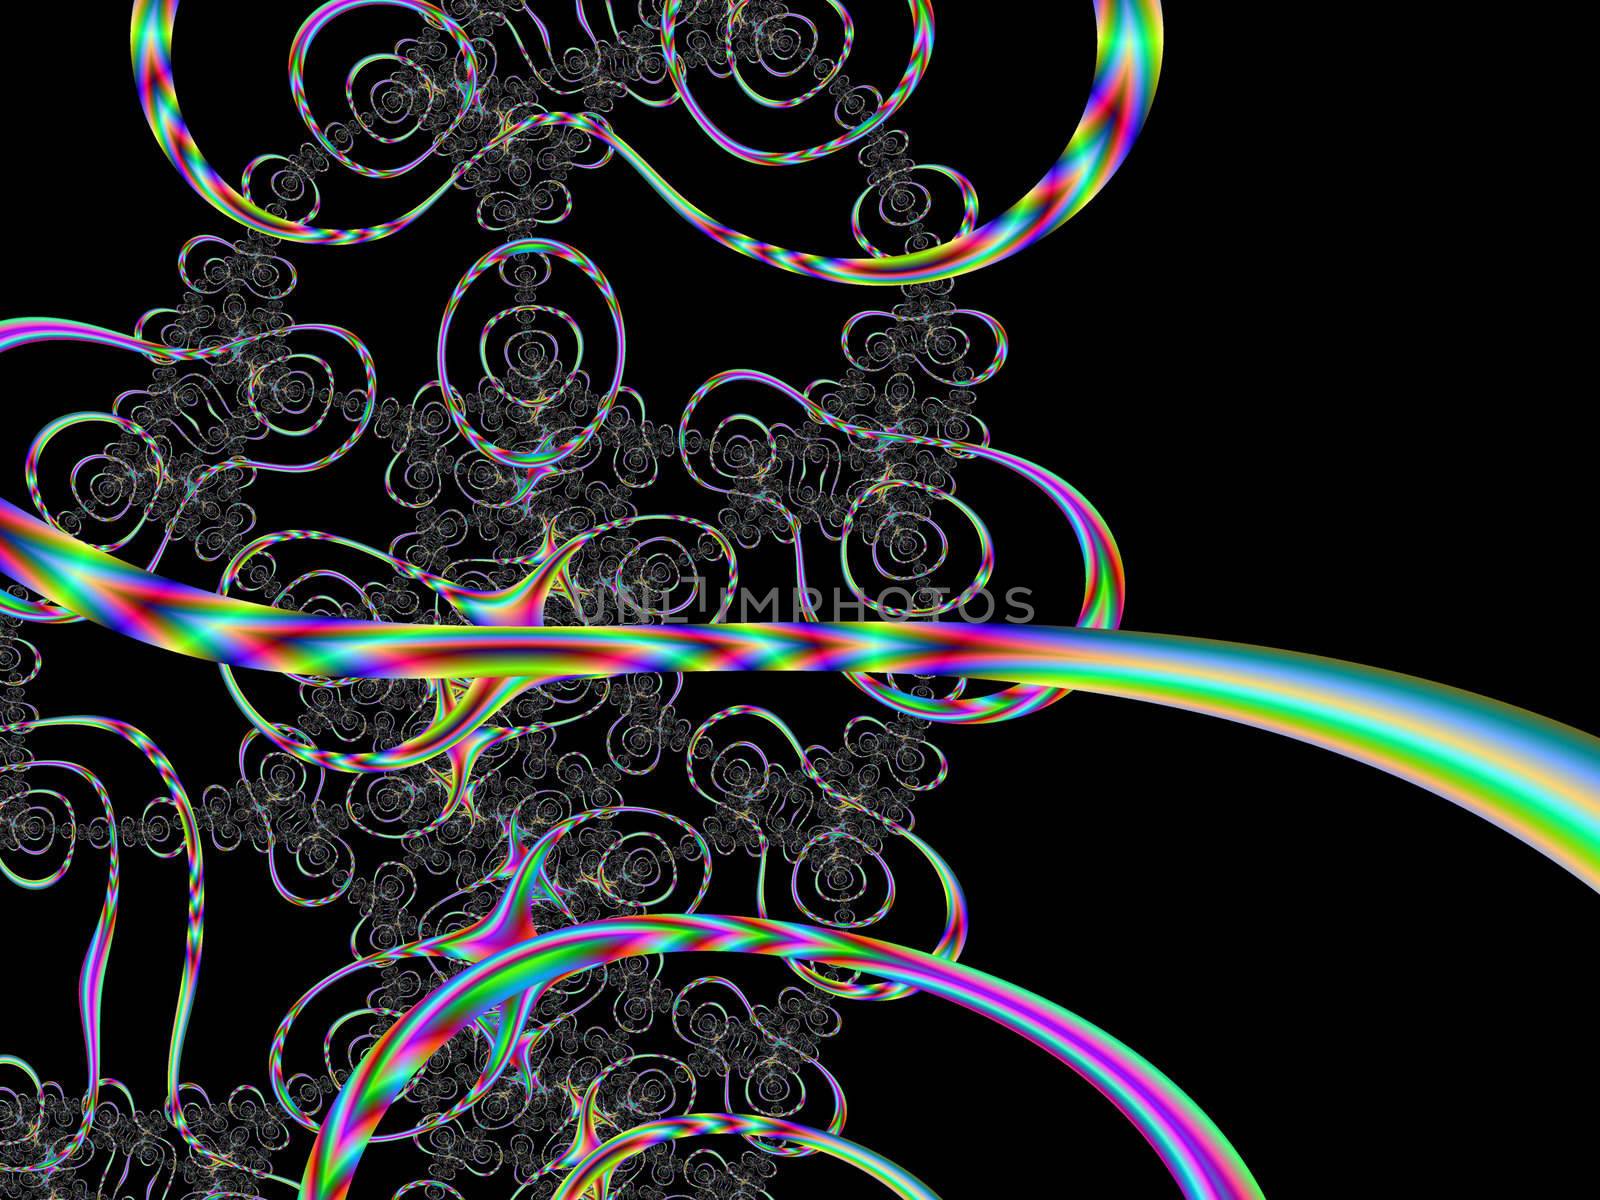 high res fractal forming multiple rings and swirls resembling circus performance